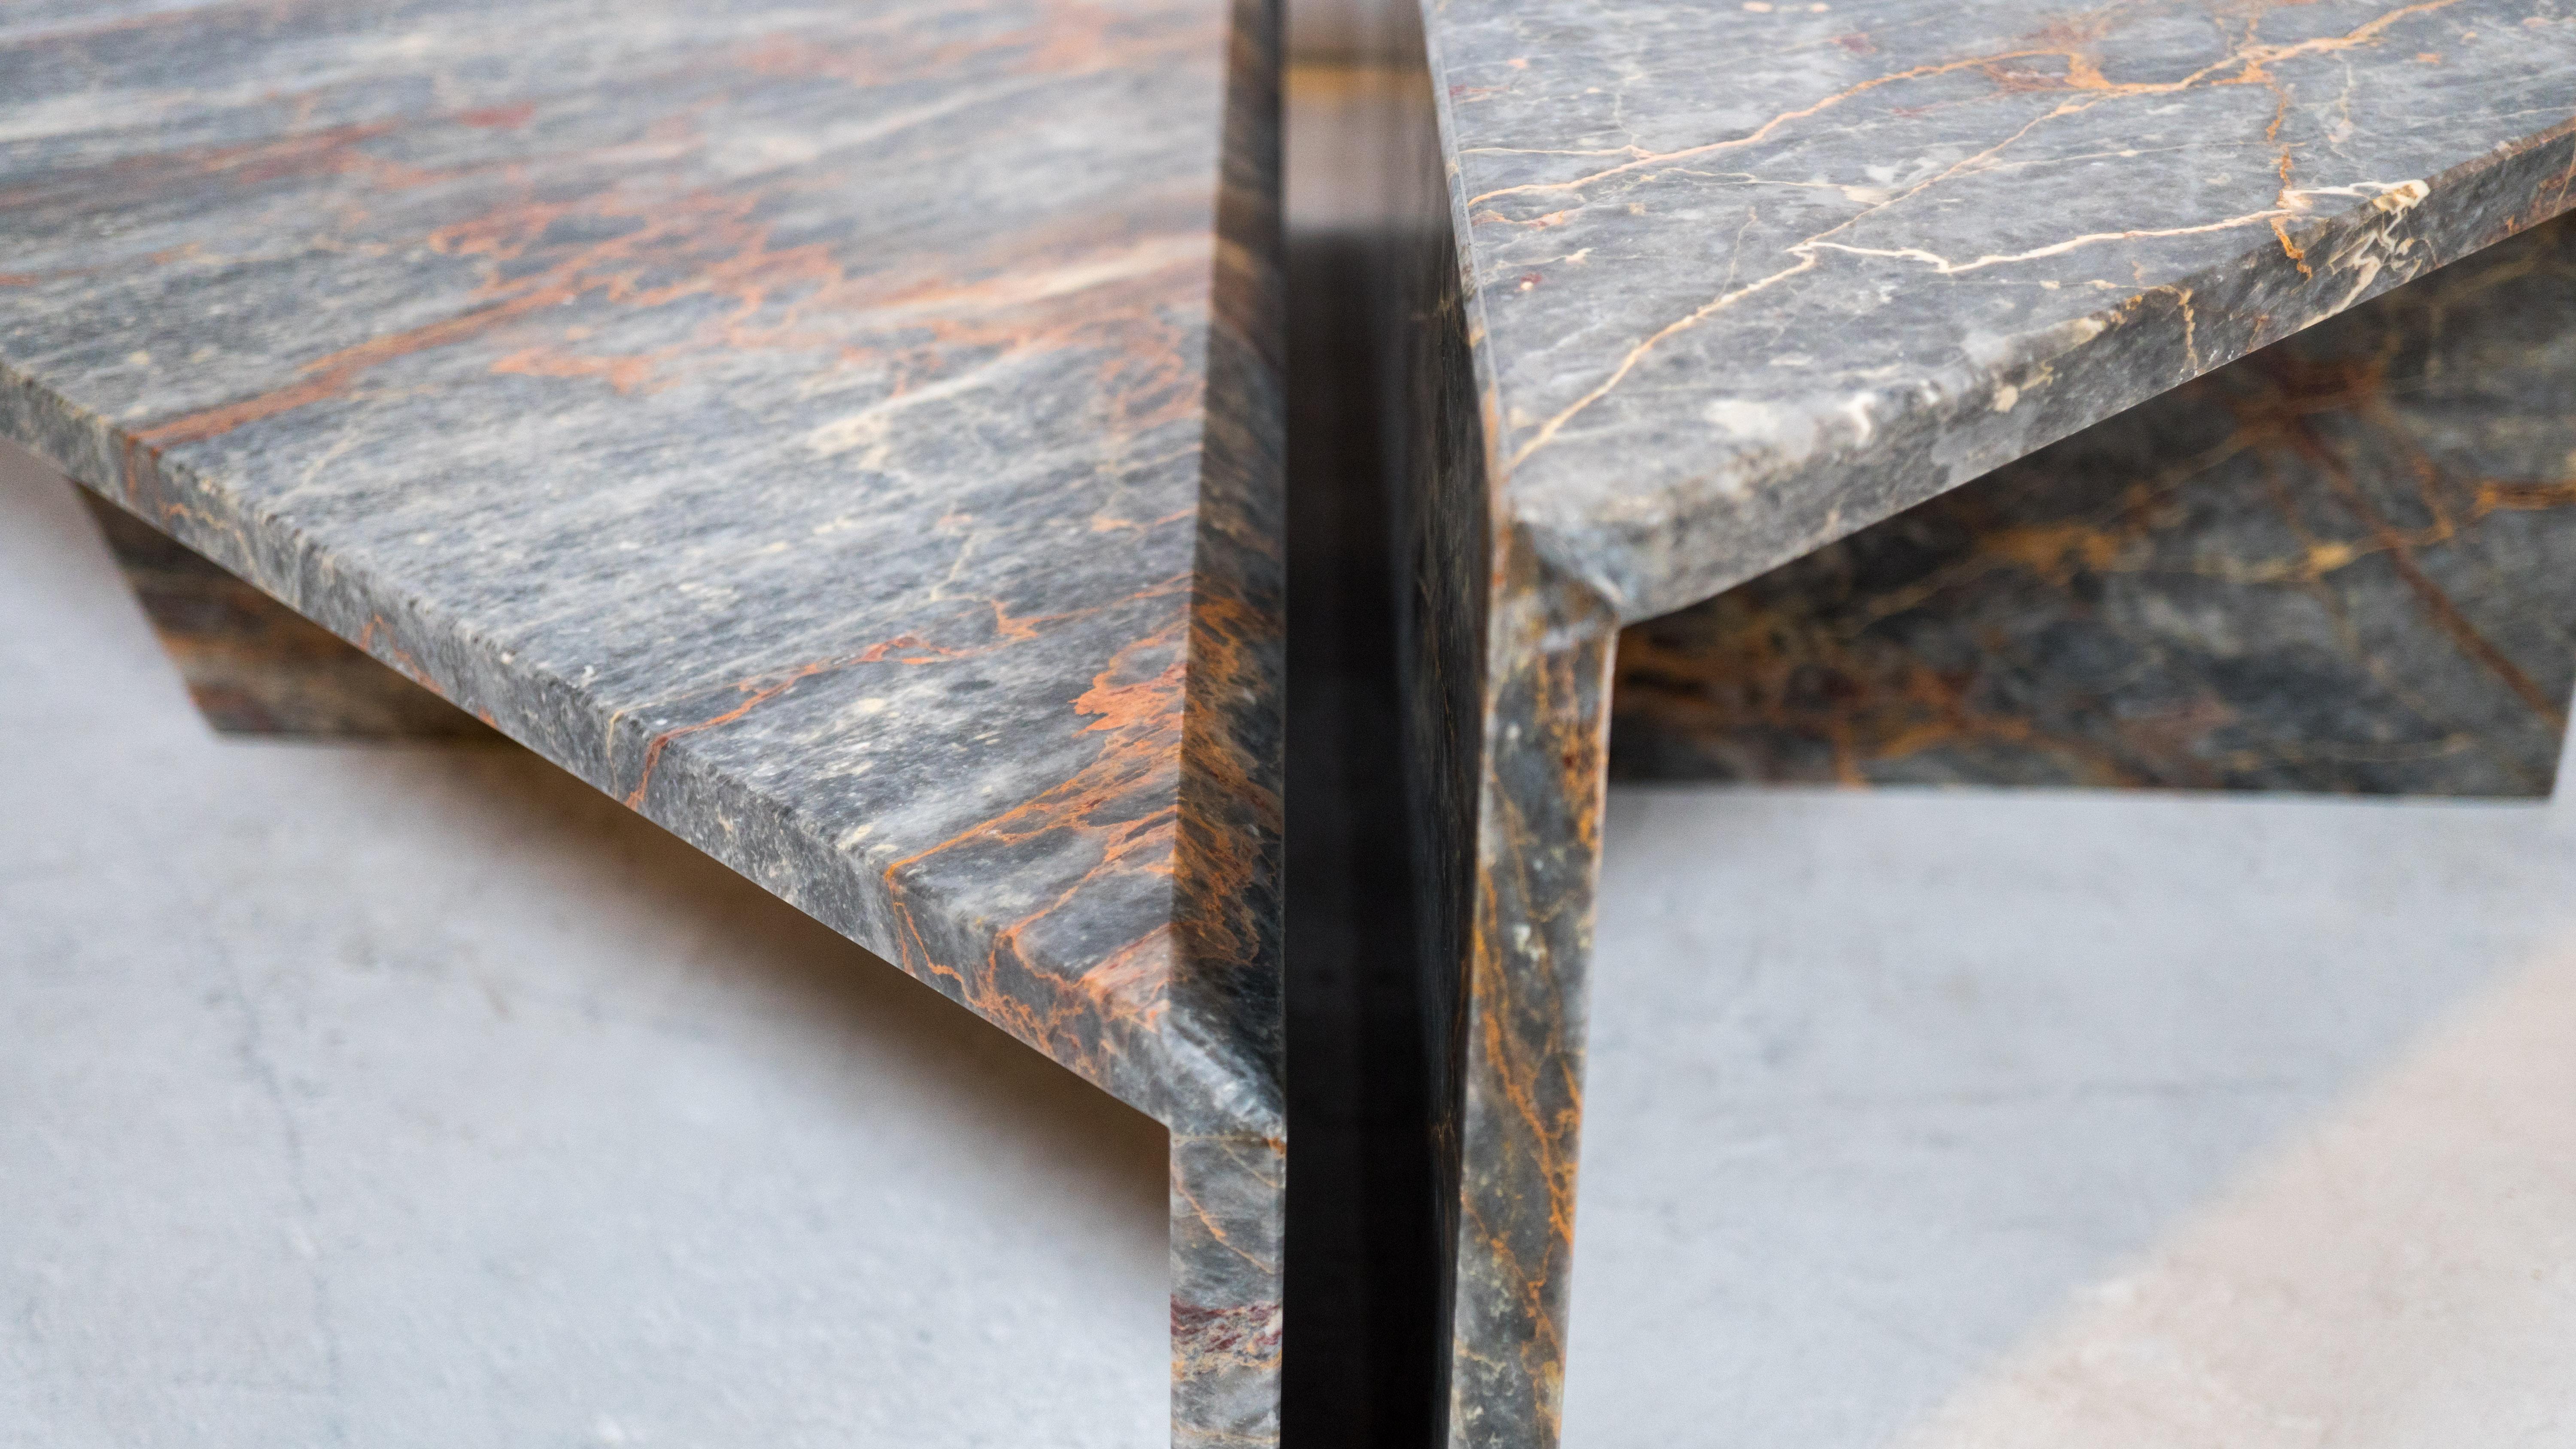 Beautiful two tiered sculptural variegated marble coffee table by Roche Bobois, circa 1980s. Comprised of two triangular pieces that fit together to create one large piece. Features hues of gray, white, orange, with veining details and a polished